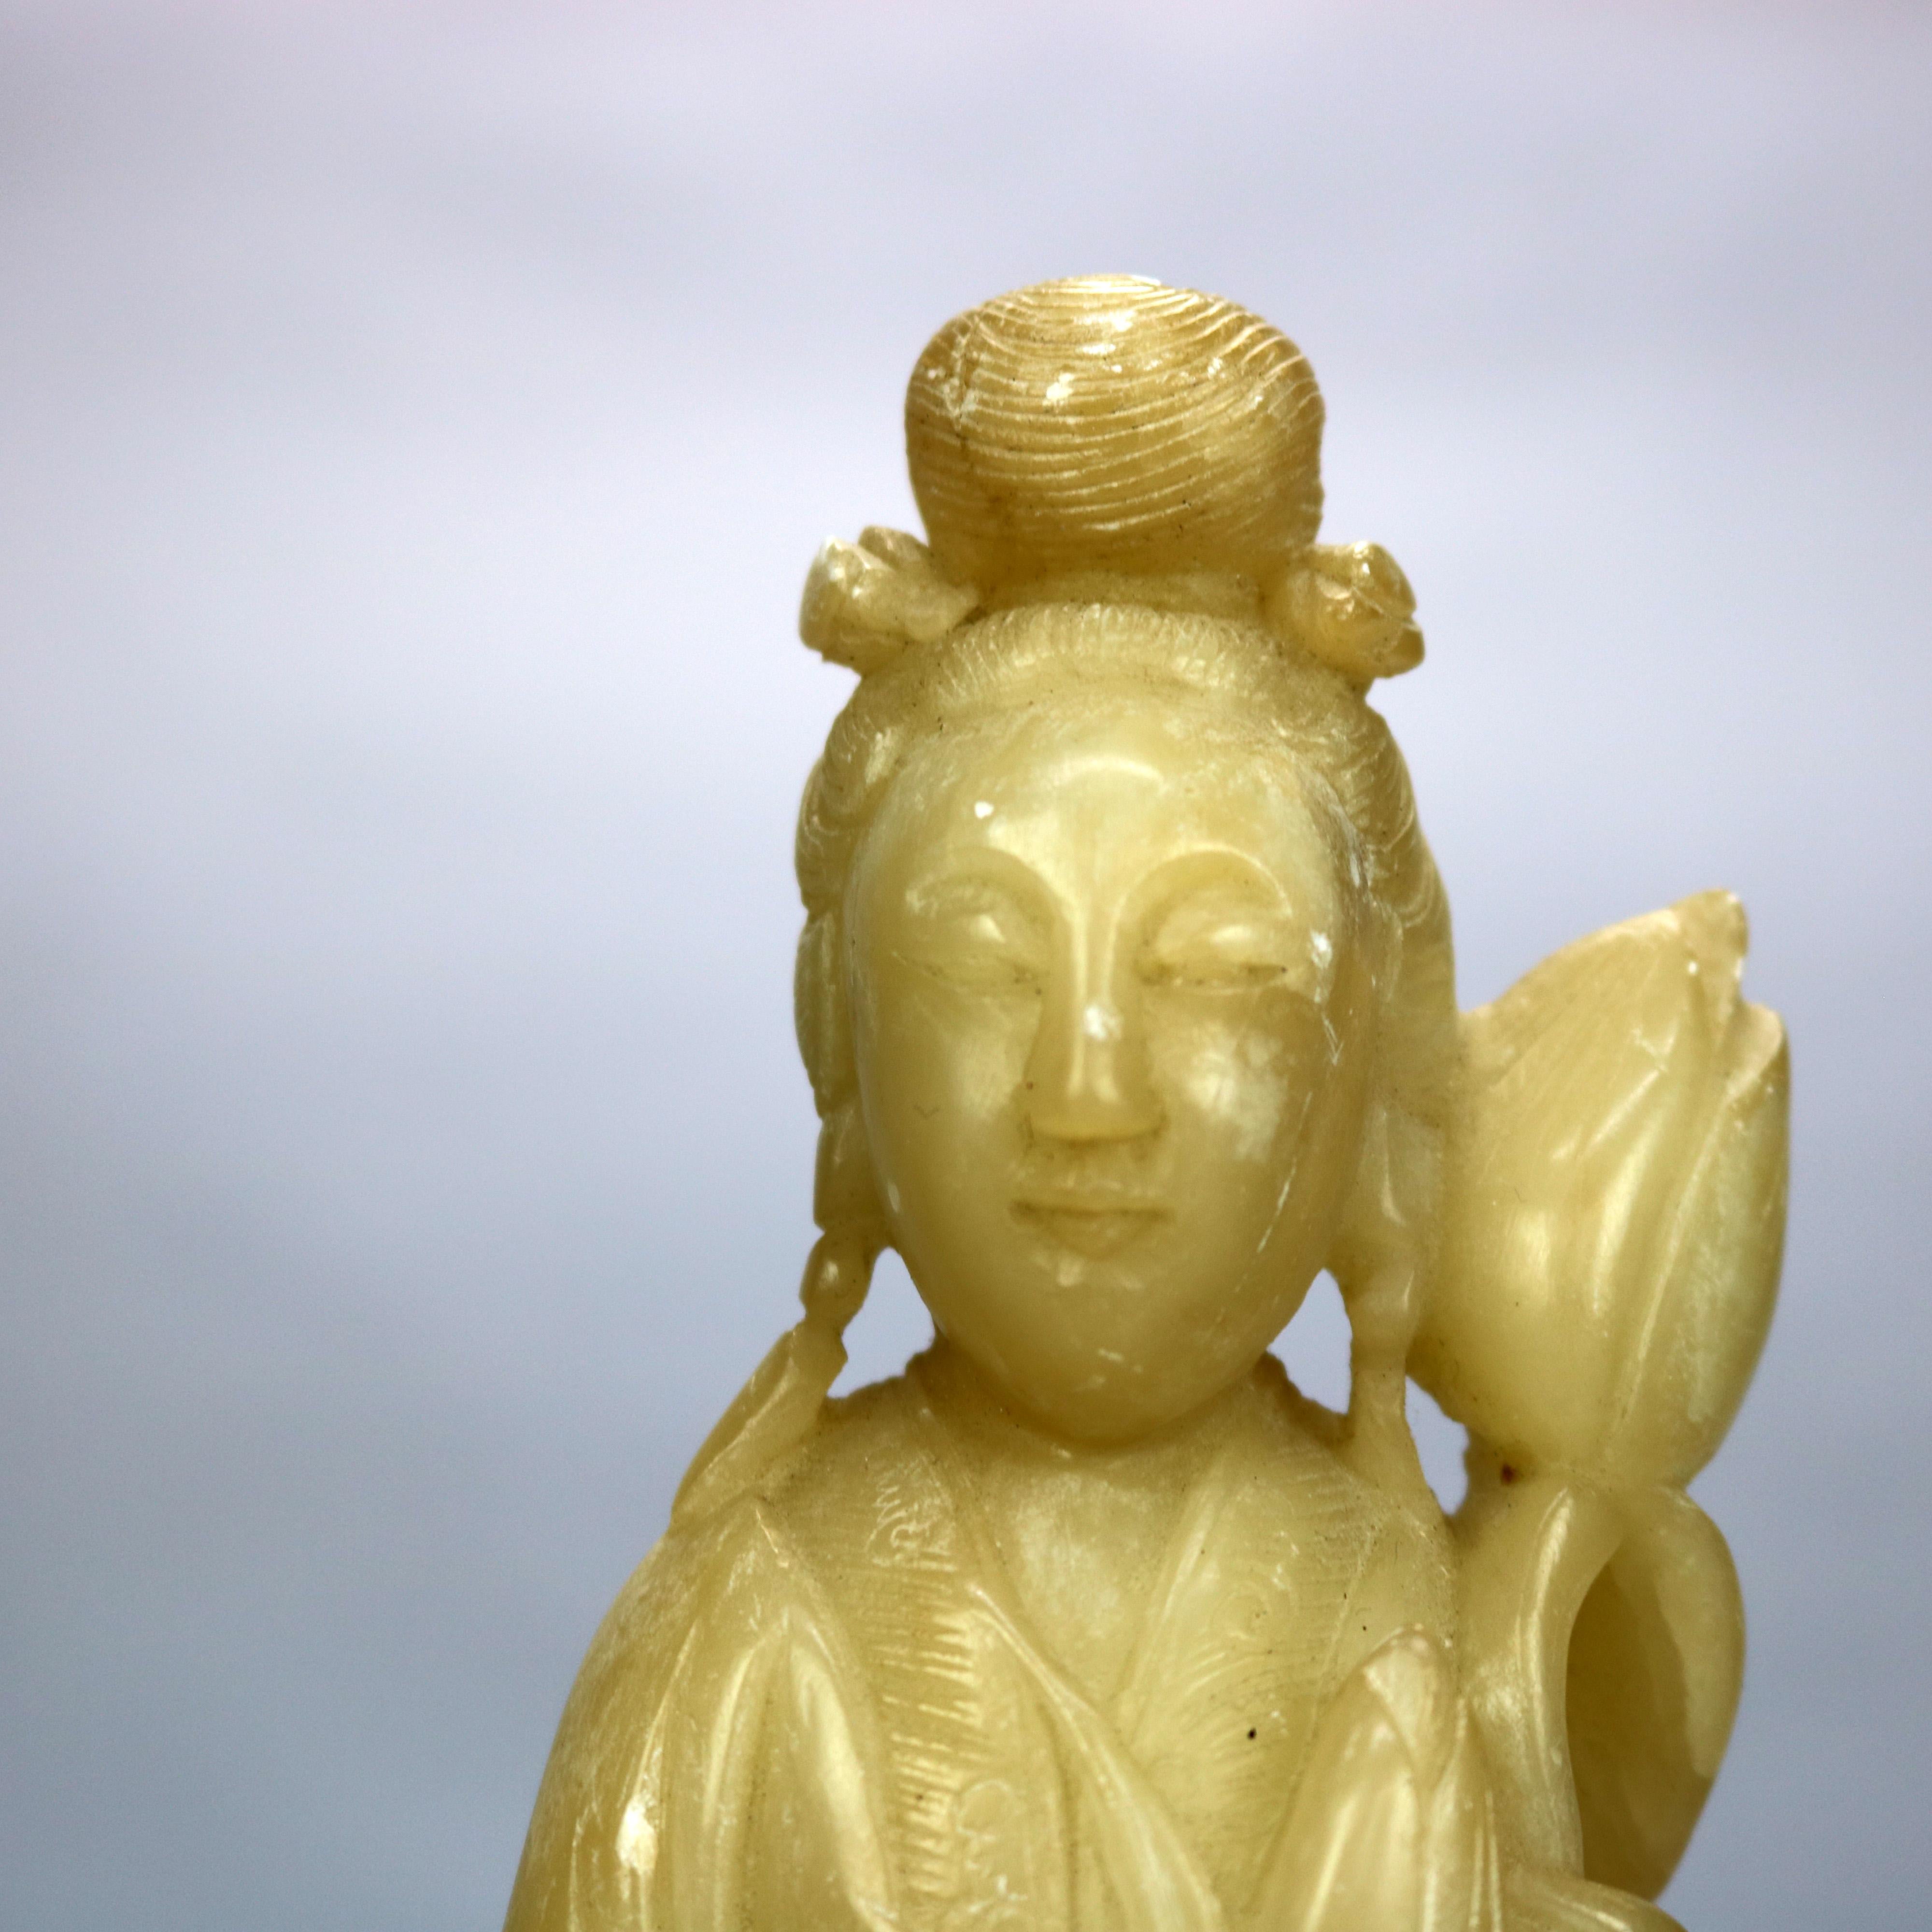 An antique Asian Buddha offers carved soapstone figure of standing female with flower, seated on carved hardwood base, c1910

Measures: 13.25